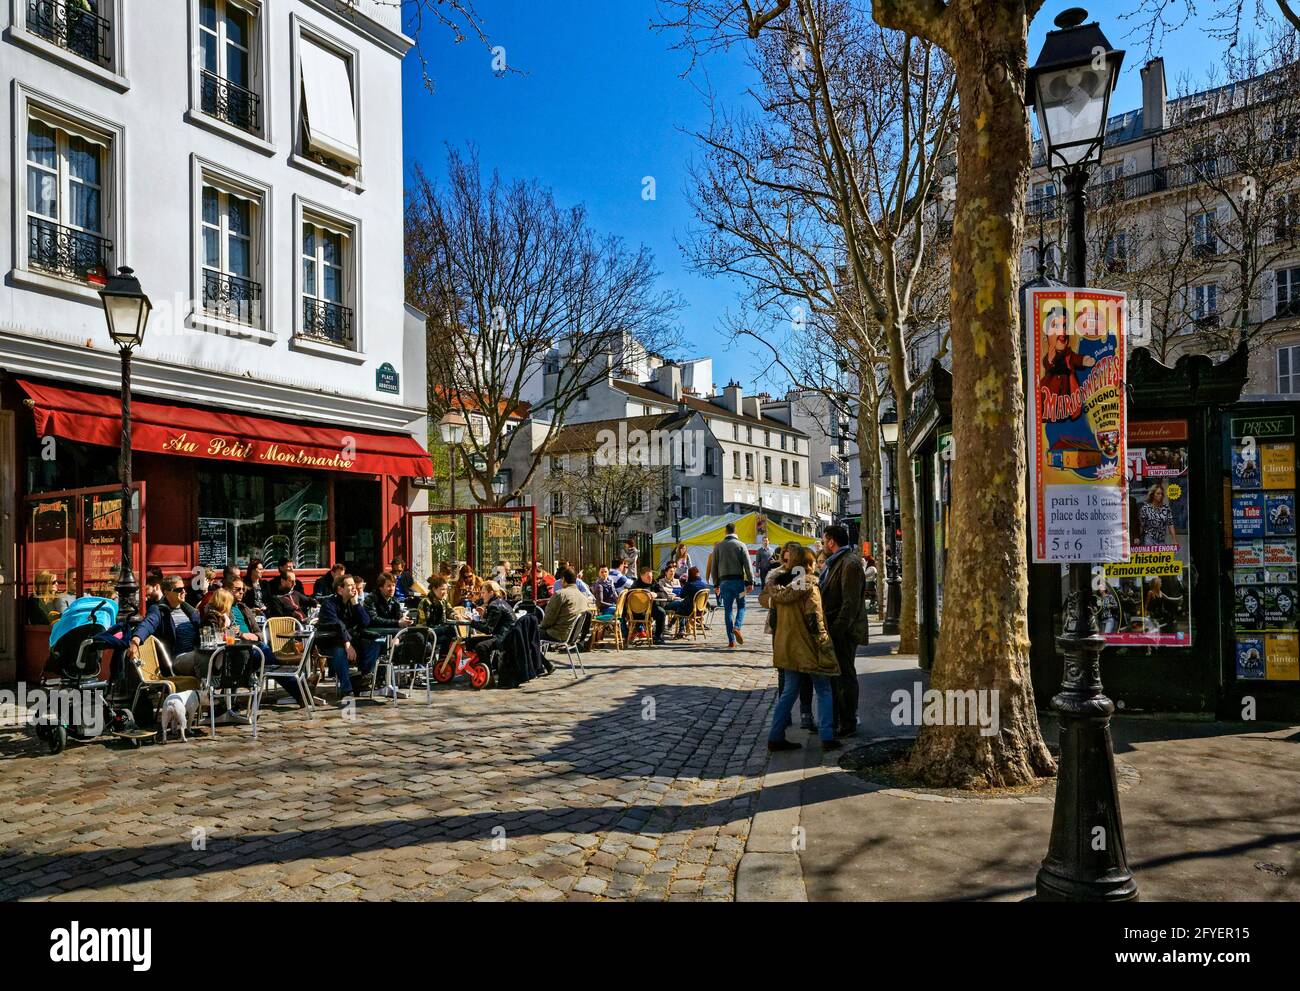 FRANCE. PARIS (75). PEOPLE AT THE TERRACE OF A CAFE-RESTAURANT IN PLACE DES ABBESSES IN MONTMARTRE. Stock Photo